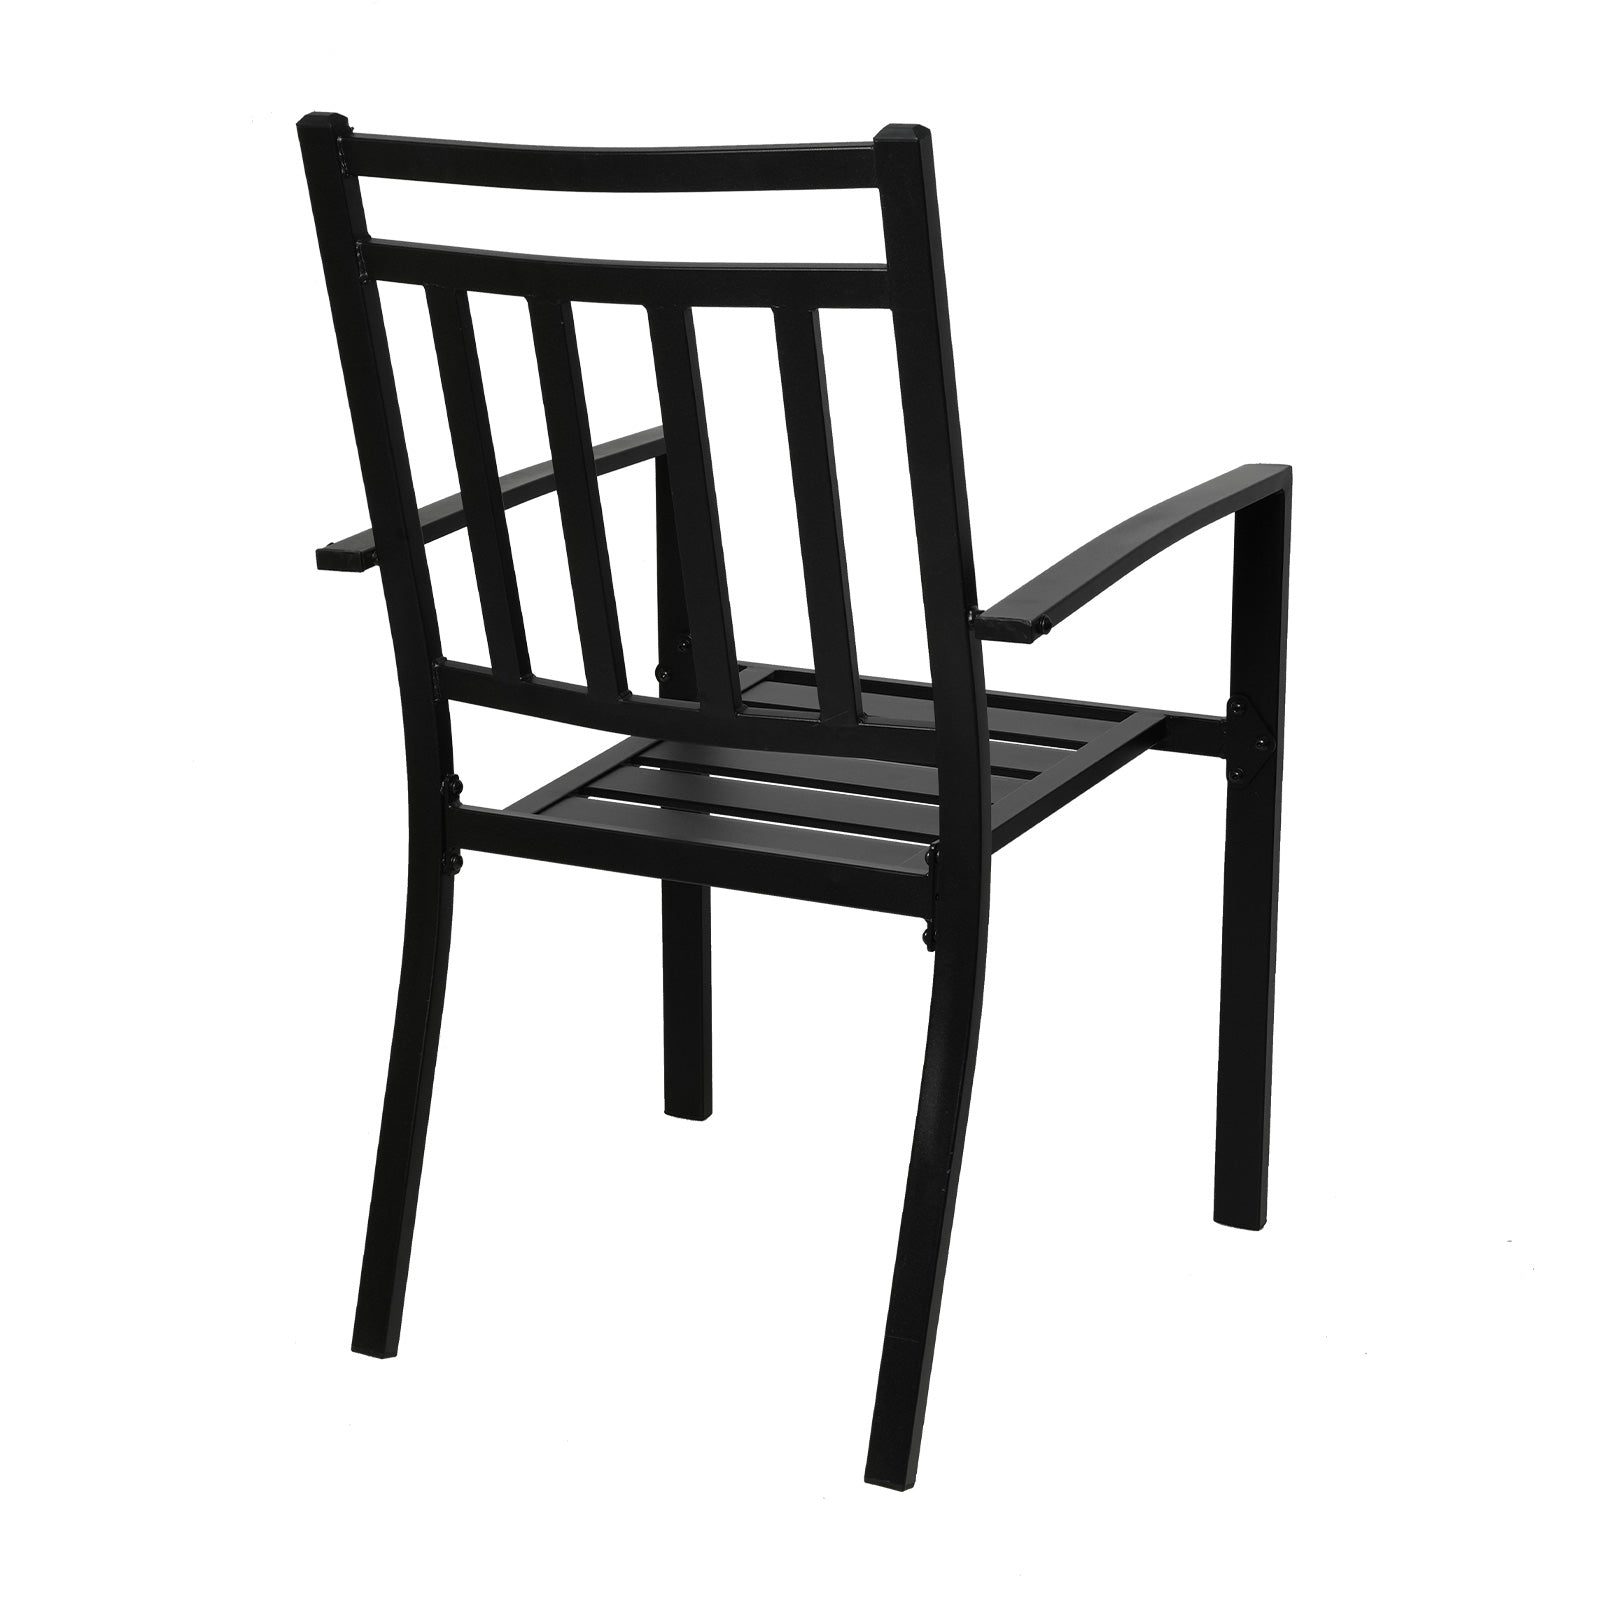 Set of 2 Outdoor Patio Dining Chairs with Armrest Garden Stackable Metal Chairs, Black